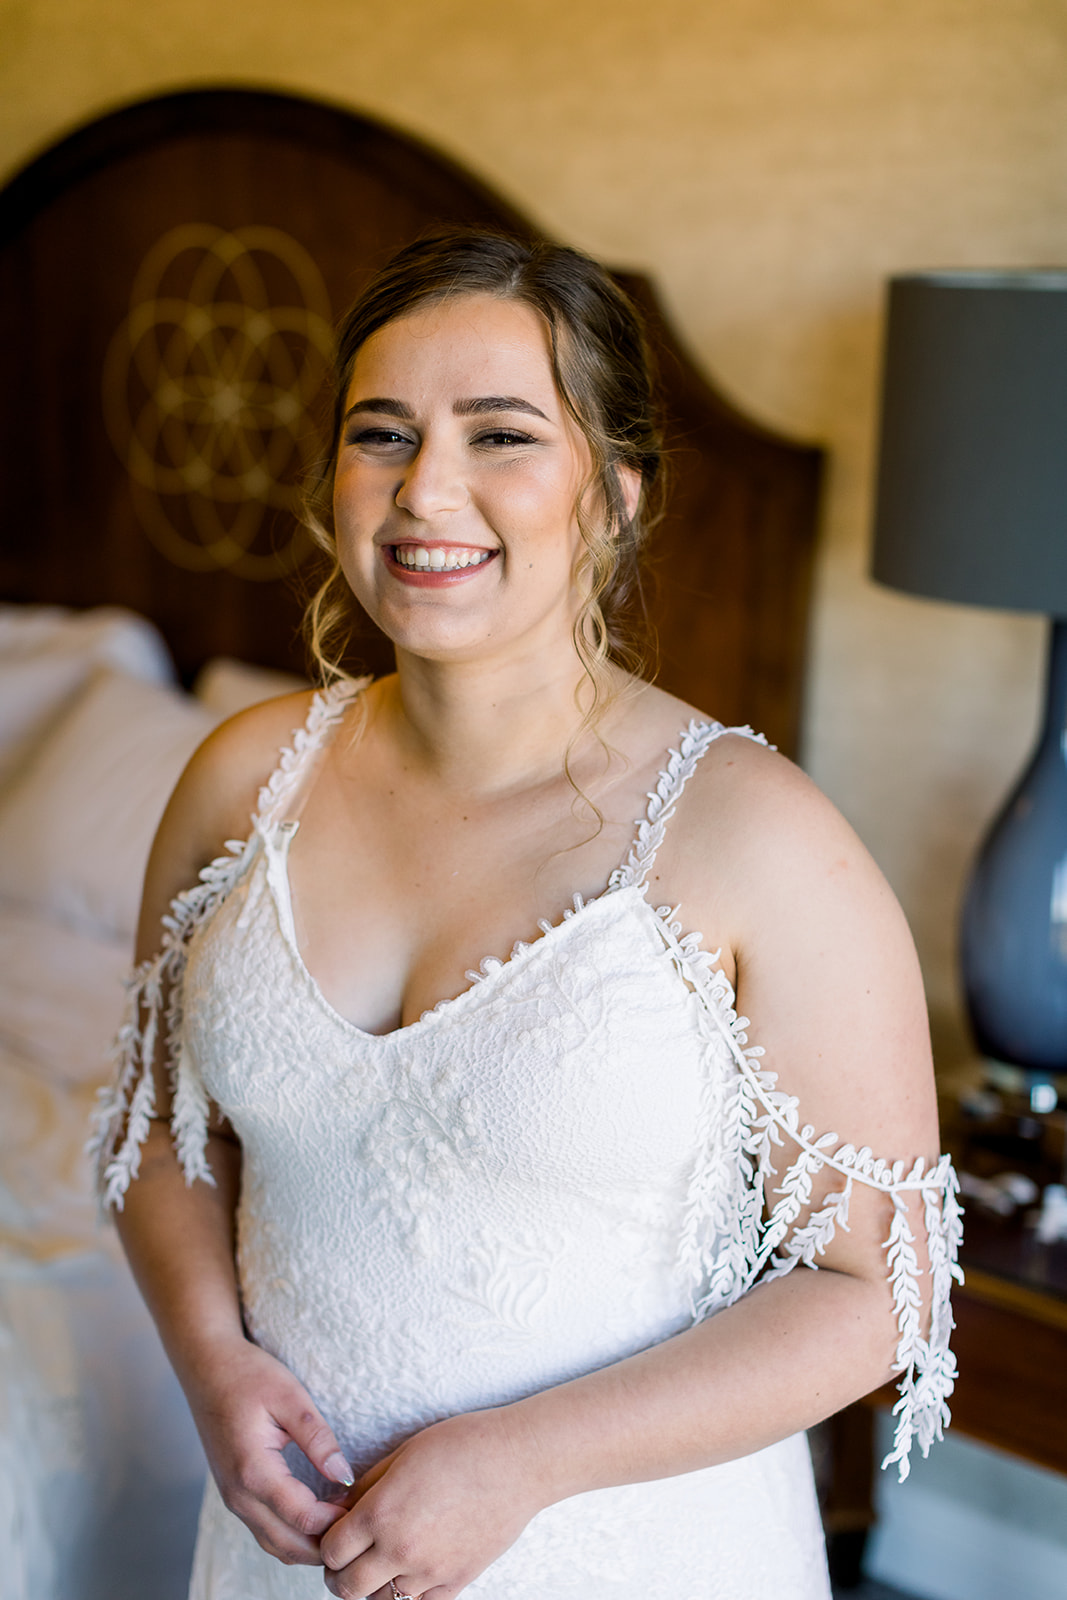 Bride smiles at camera in her wedding dress for her big day